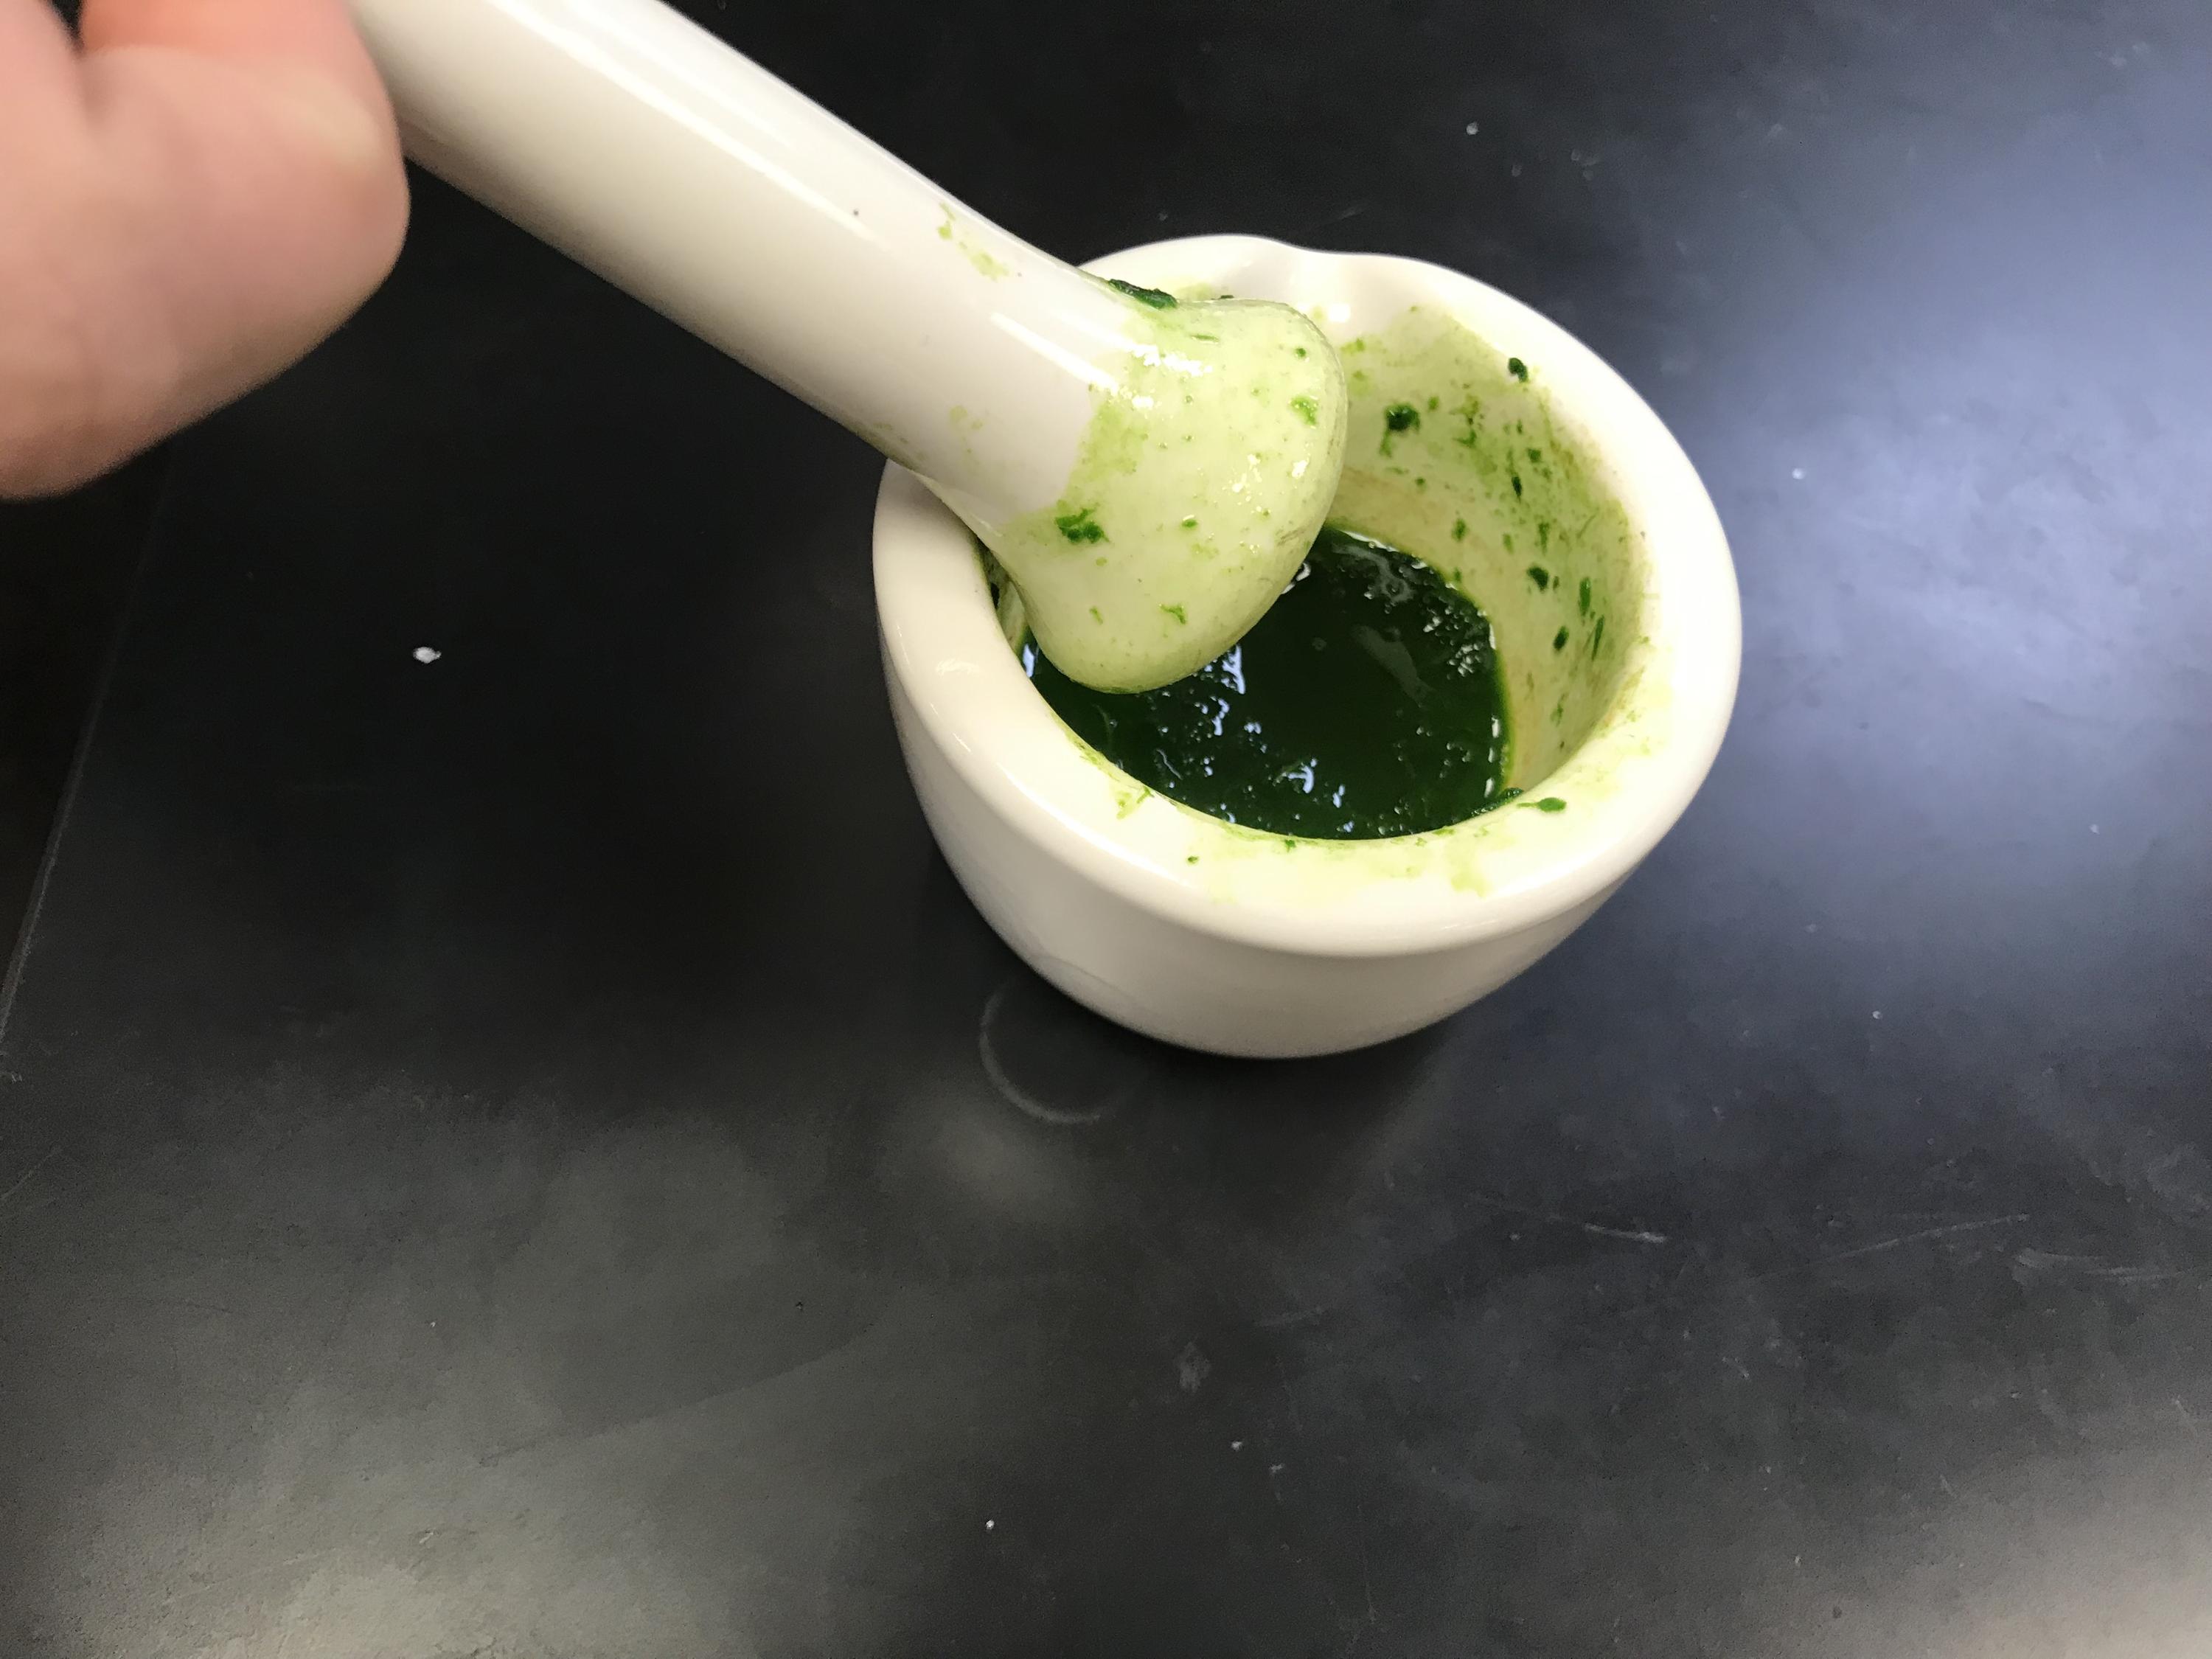 a green paste in a white mortar and pestle is also in the mortar